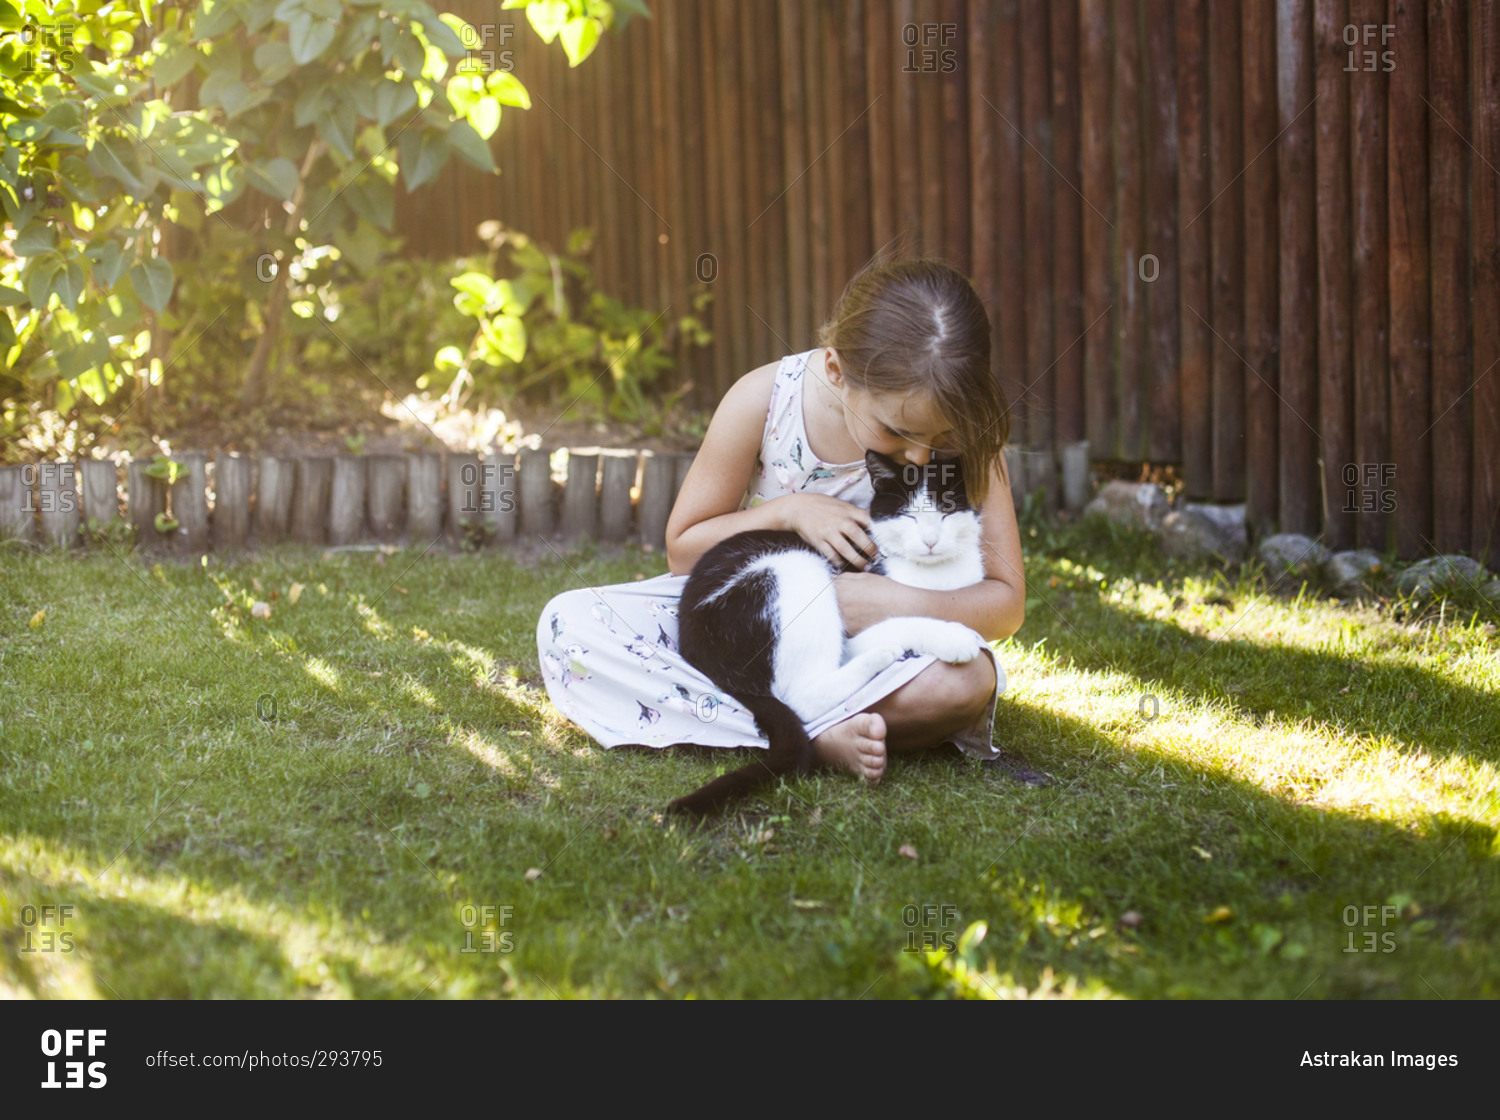 Young girl kisses her cat as she sits on grass in backyard